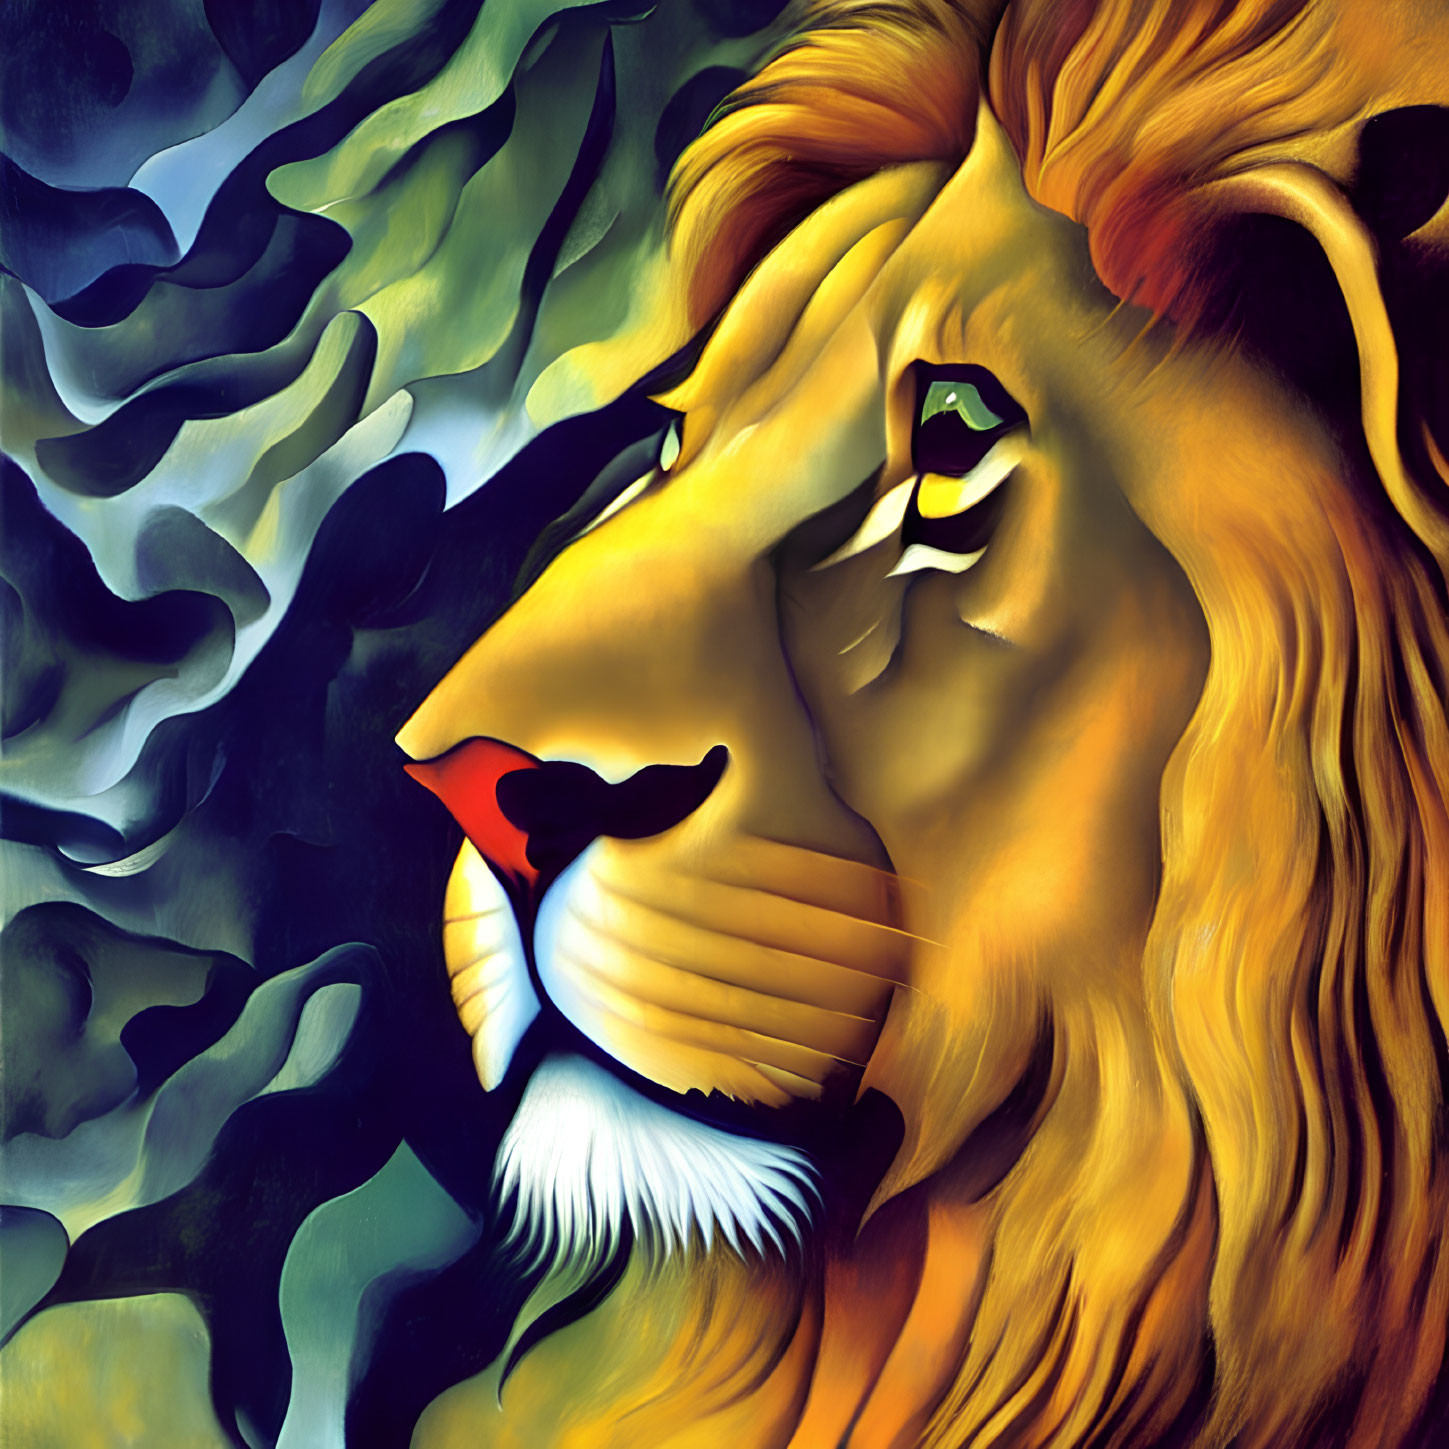 Colorful Stylized Lion Illustration with Flowing Mane on Abstract Green and Black Background